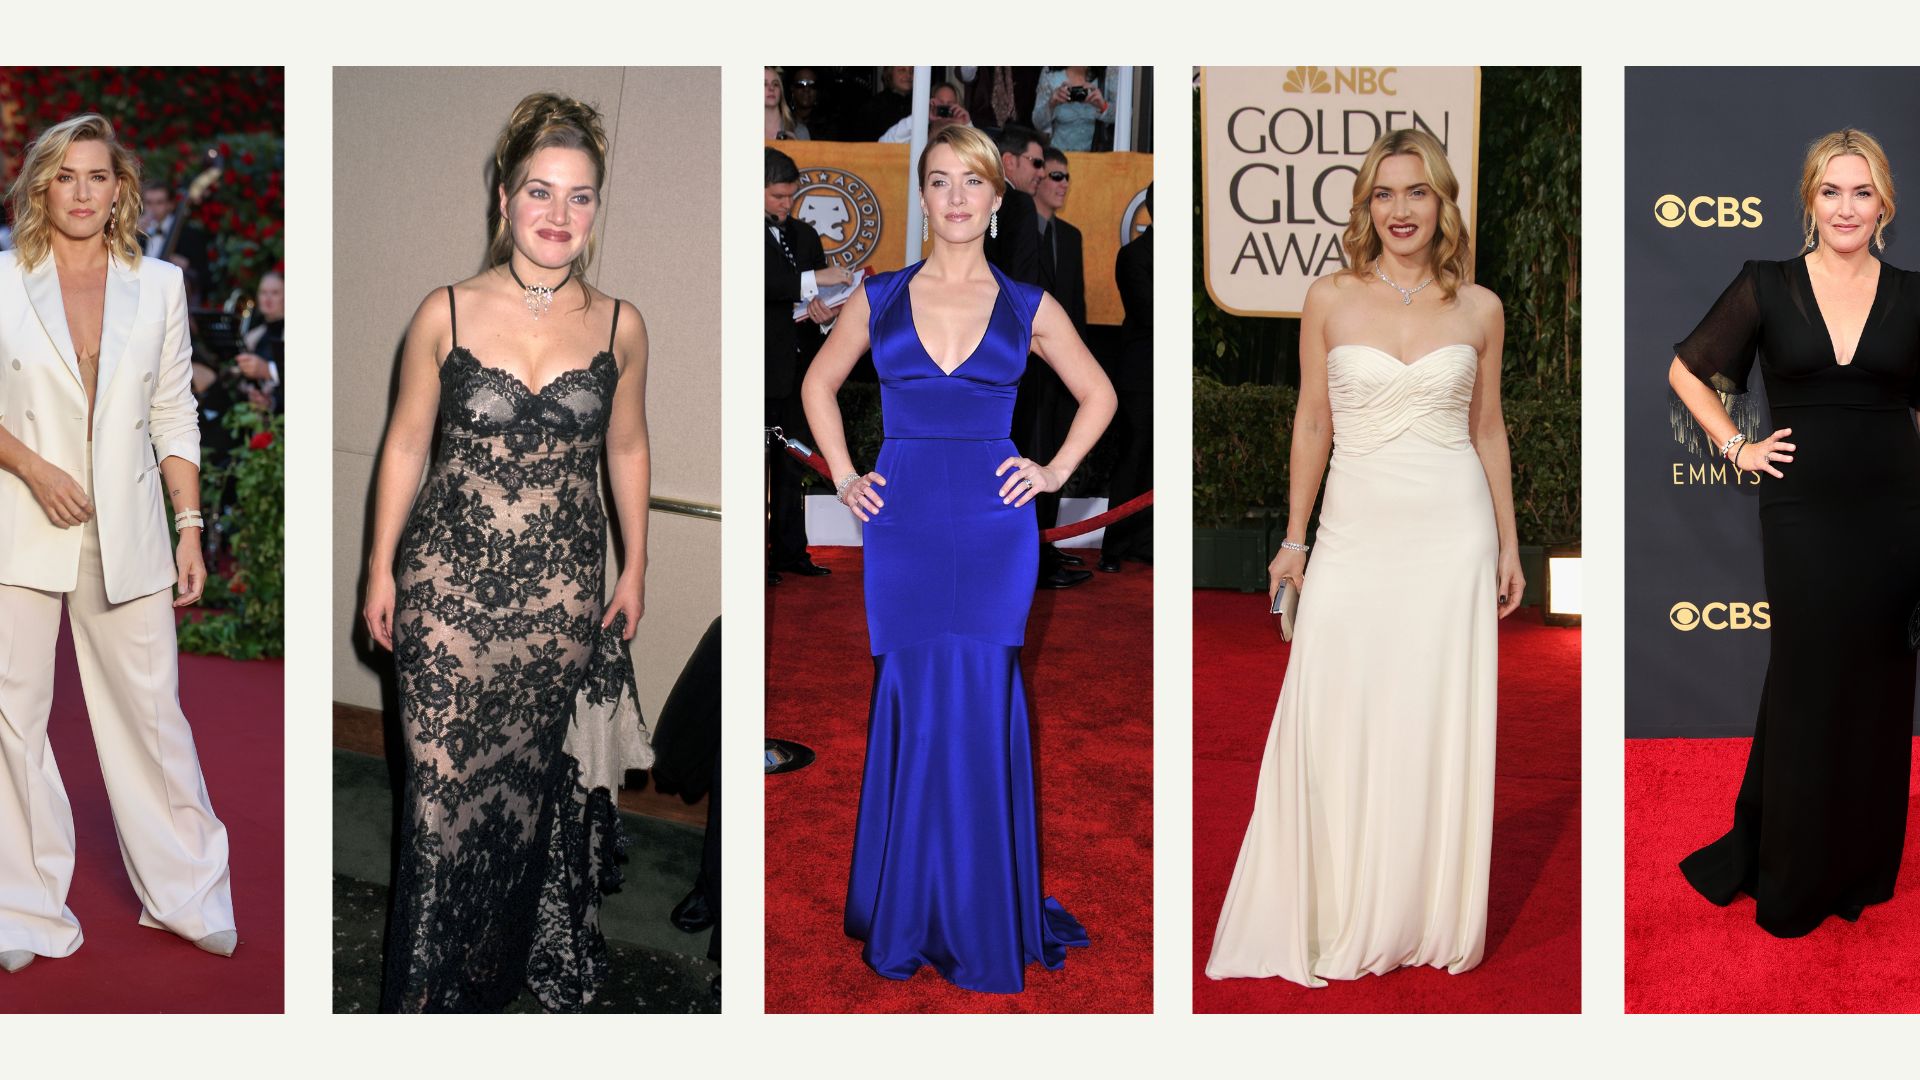 From the Red Carpet to Fashion's Night Out: As Shapely As Can Be